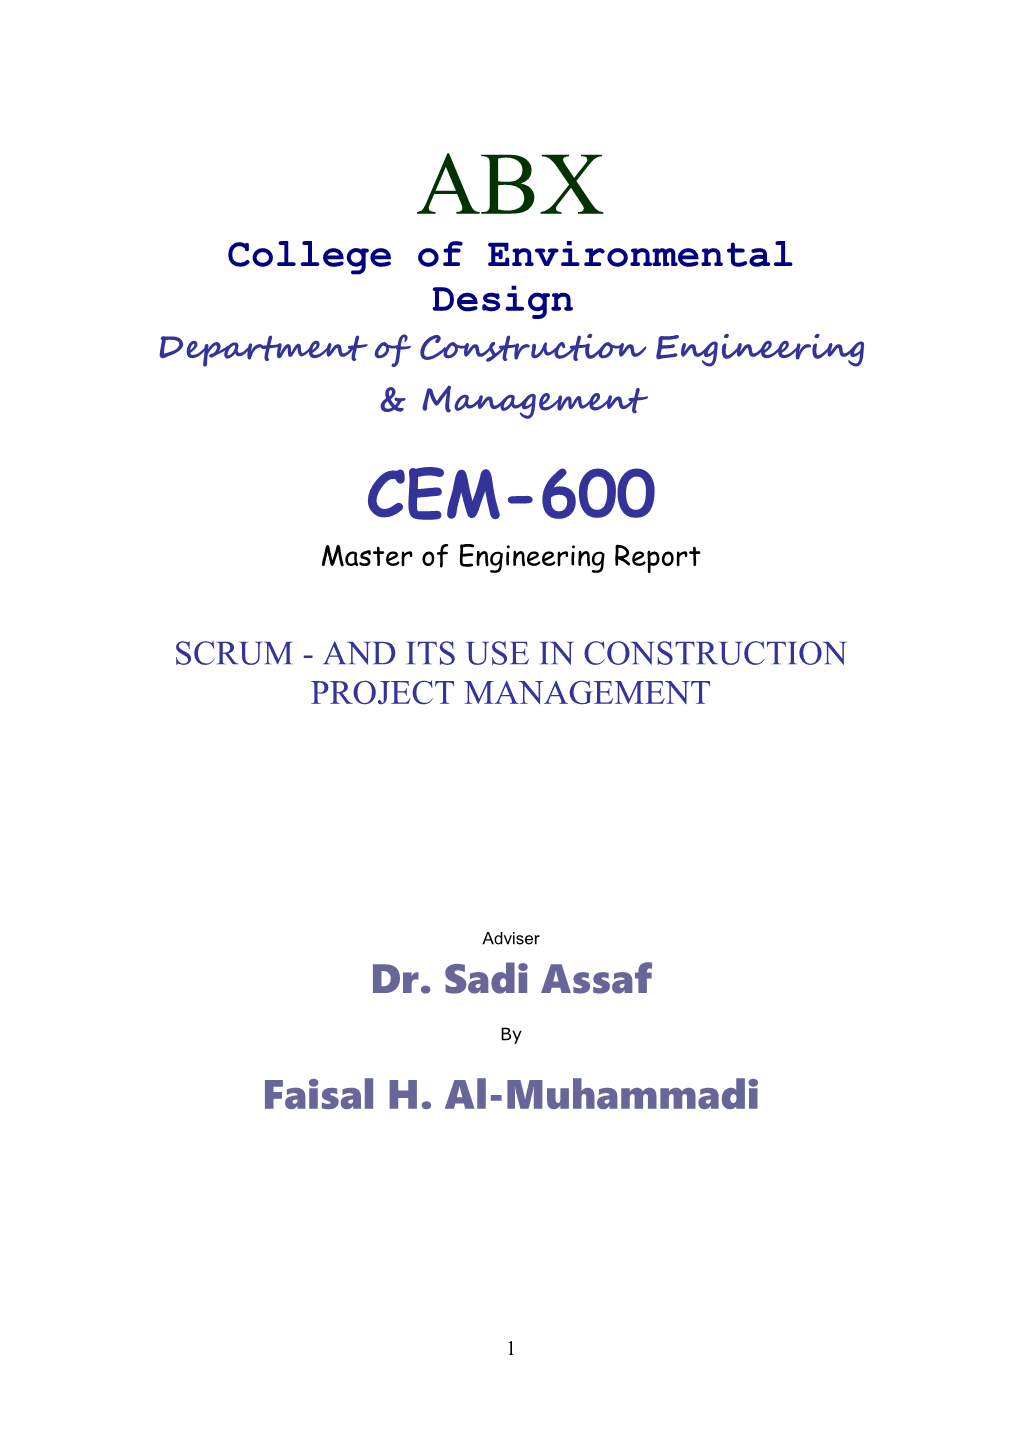 Department of Construction Engineering & Management